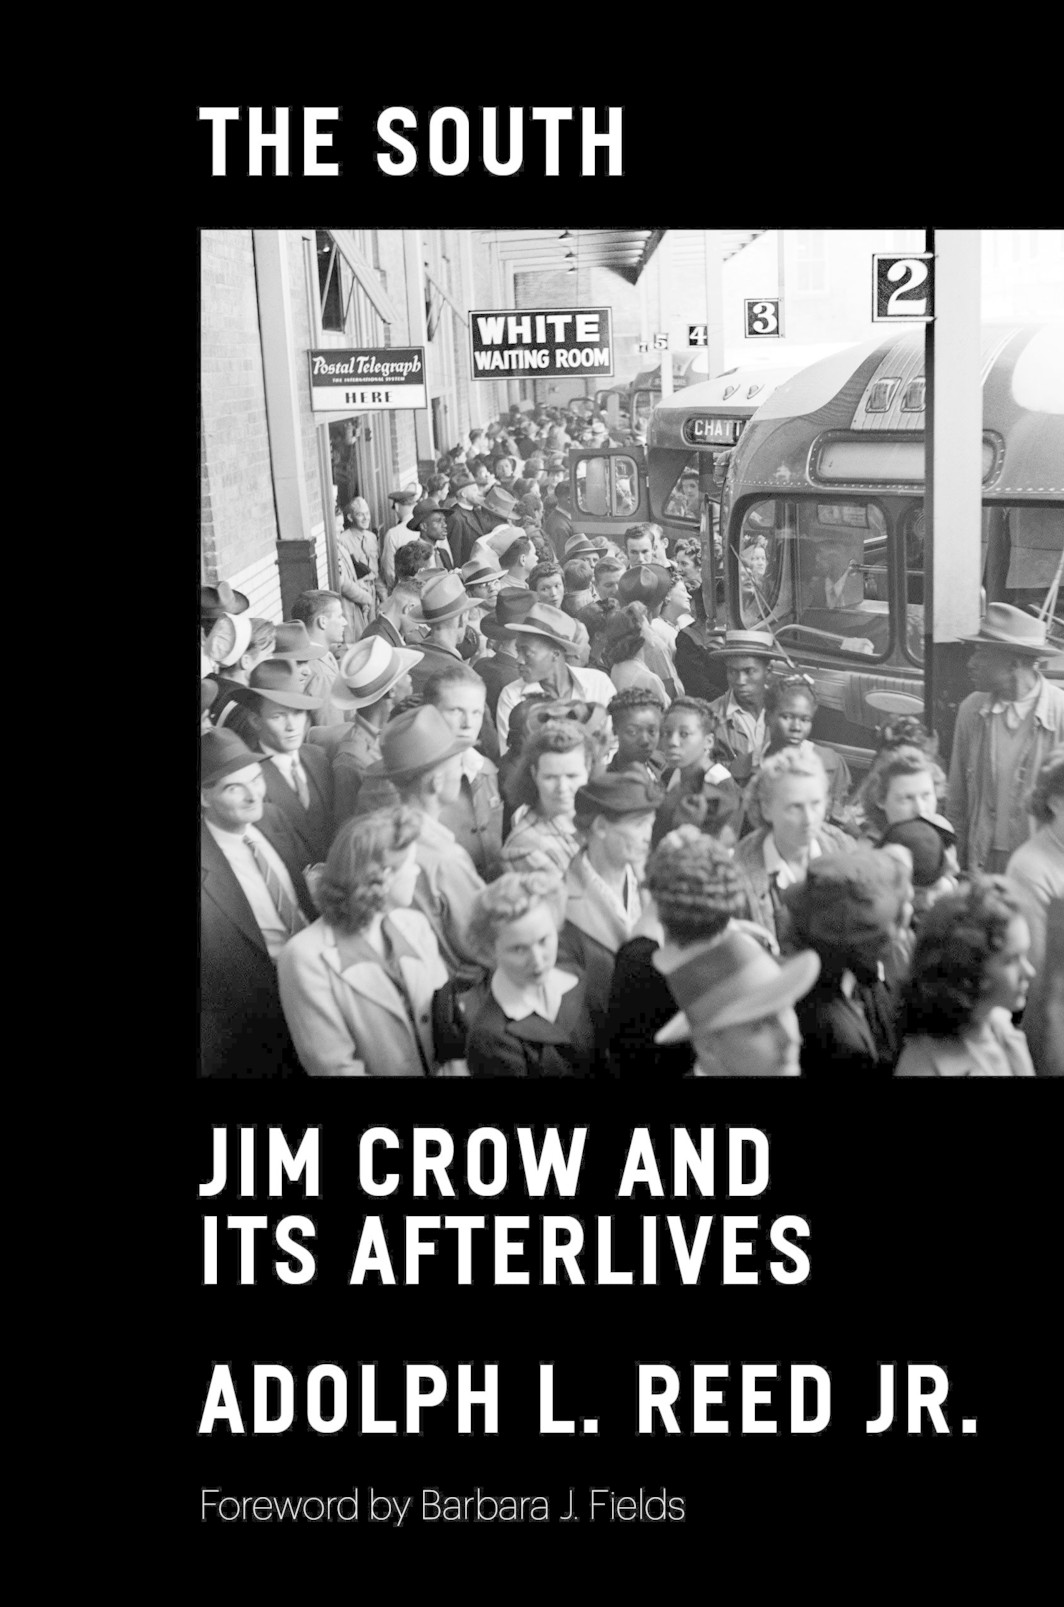 The cover of The South: Jim Crow and Its Afterlives